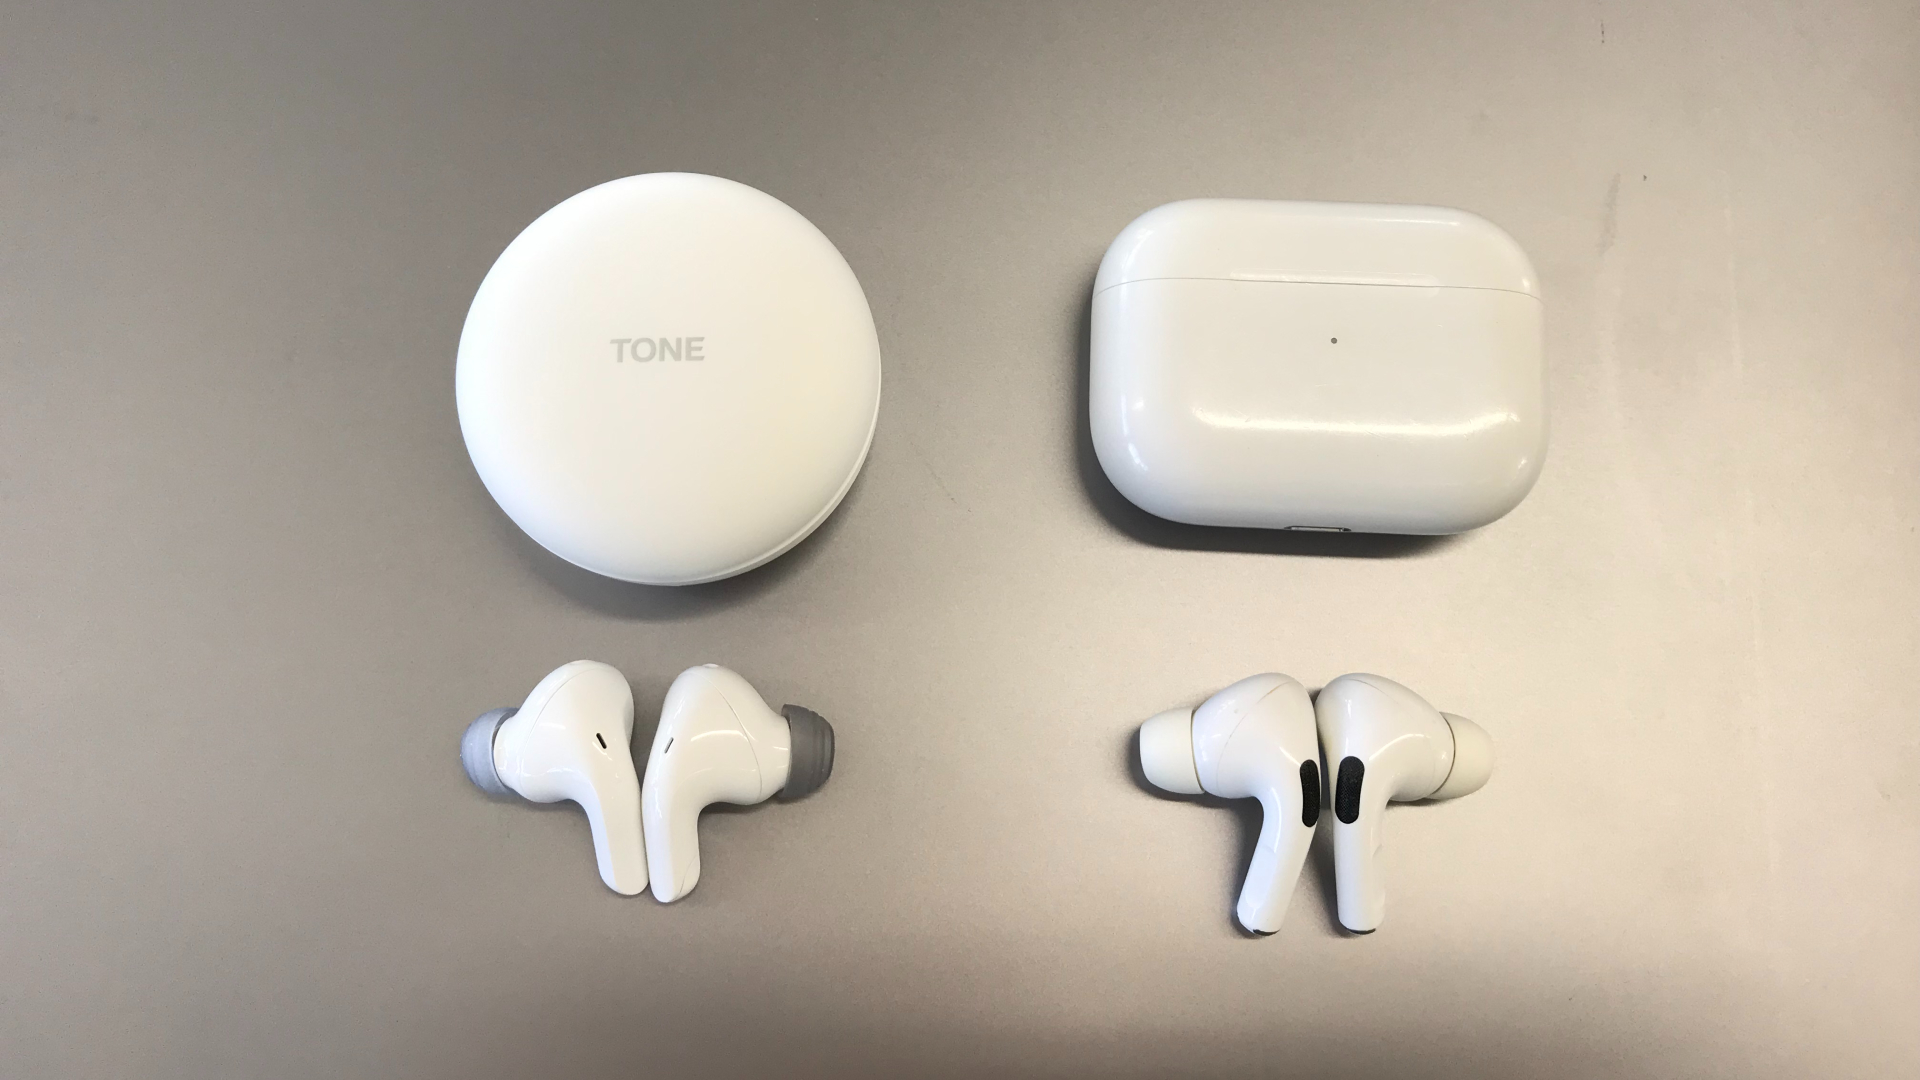 Lg Tone Free T90 and Apple AirPods Pro side by side on silver background